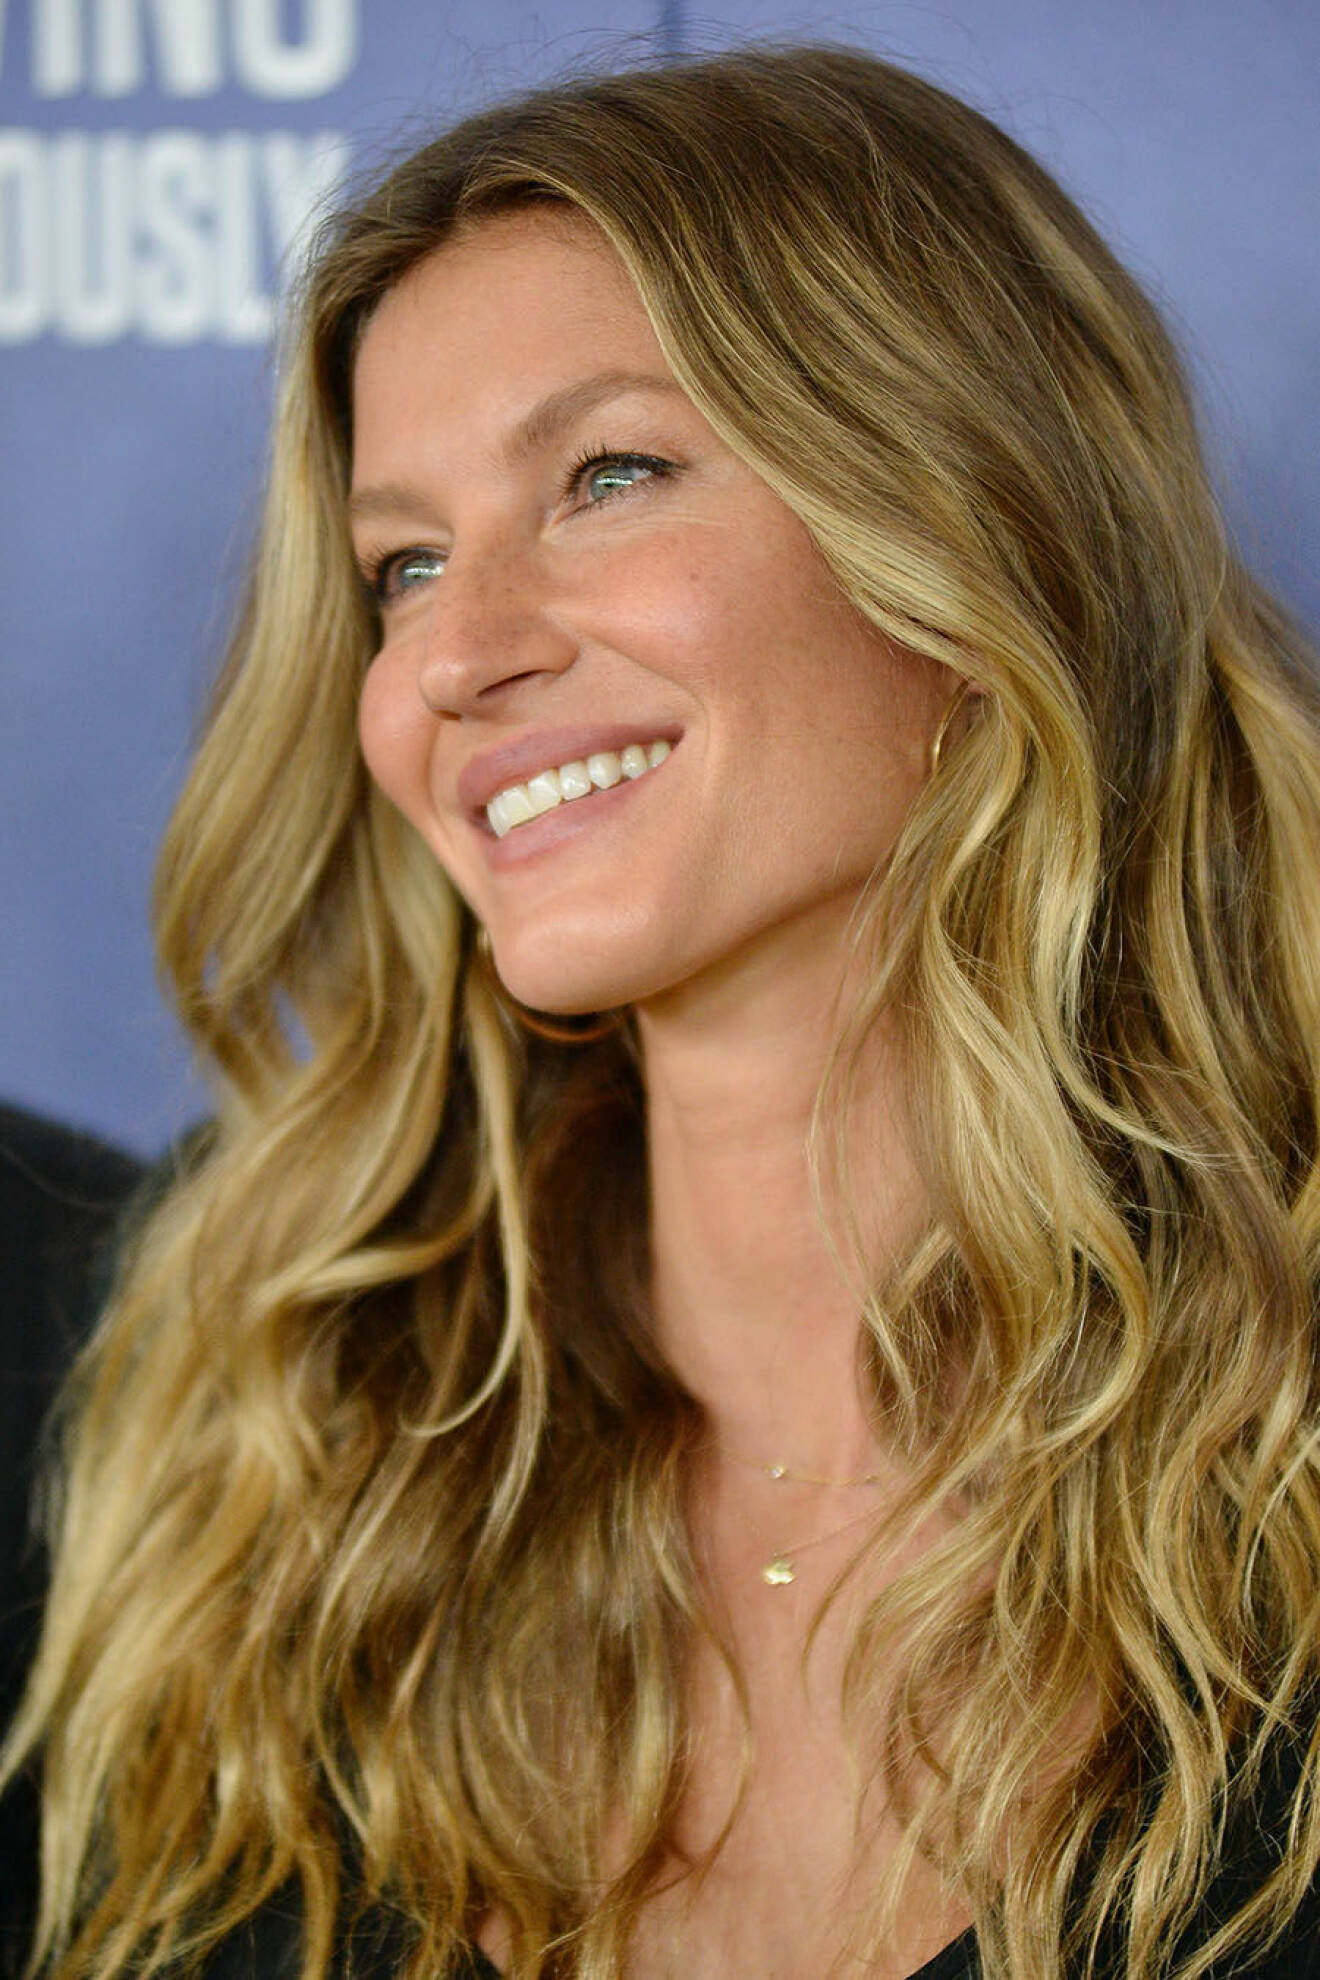 Gisele Bundchen attending National Geographics Years Of Living Dangerously new season world premiere at the American Museum of Natural History on September 21, 2016 in New York City Credit: insight media